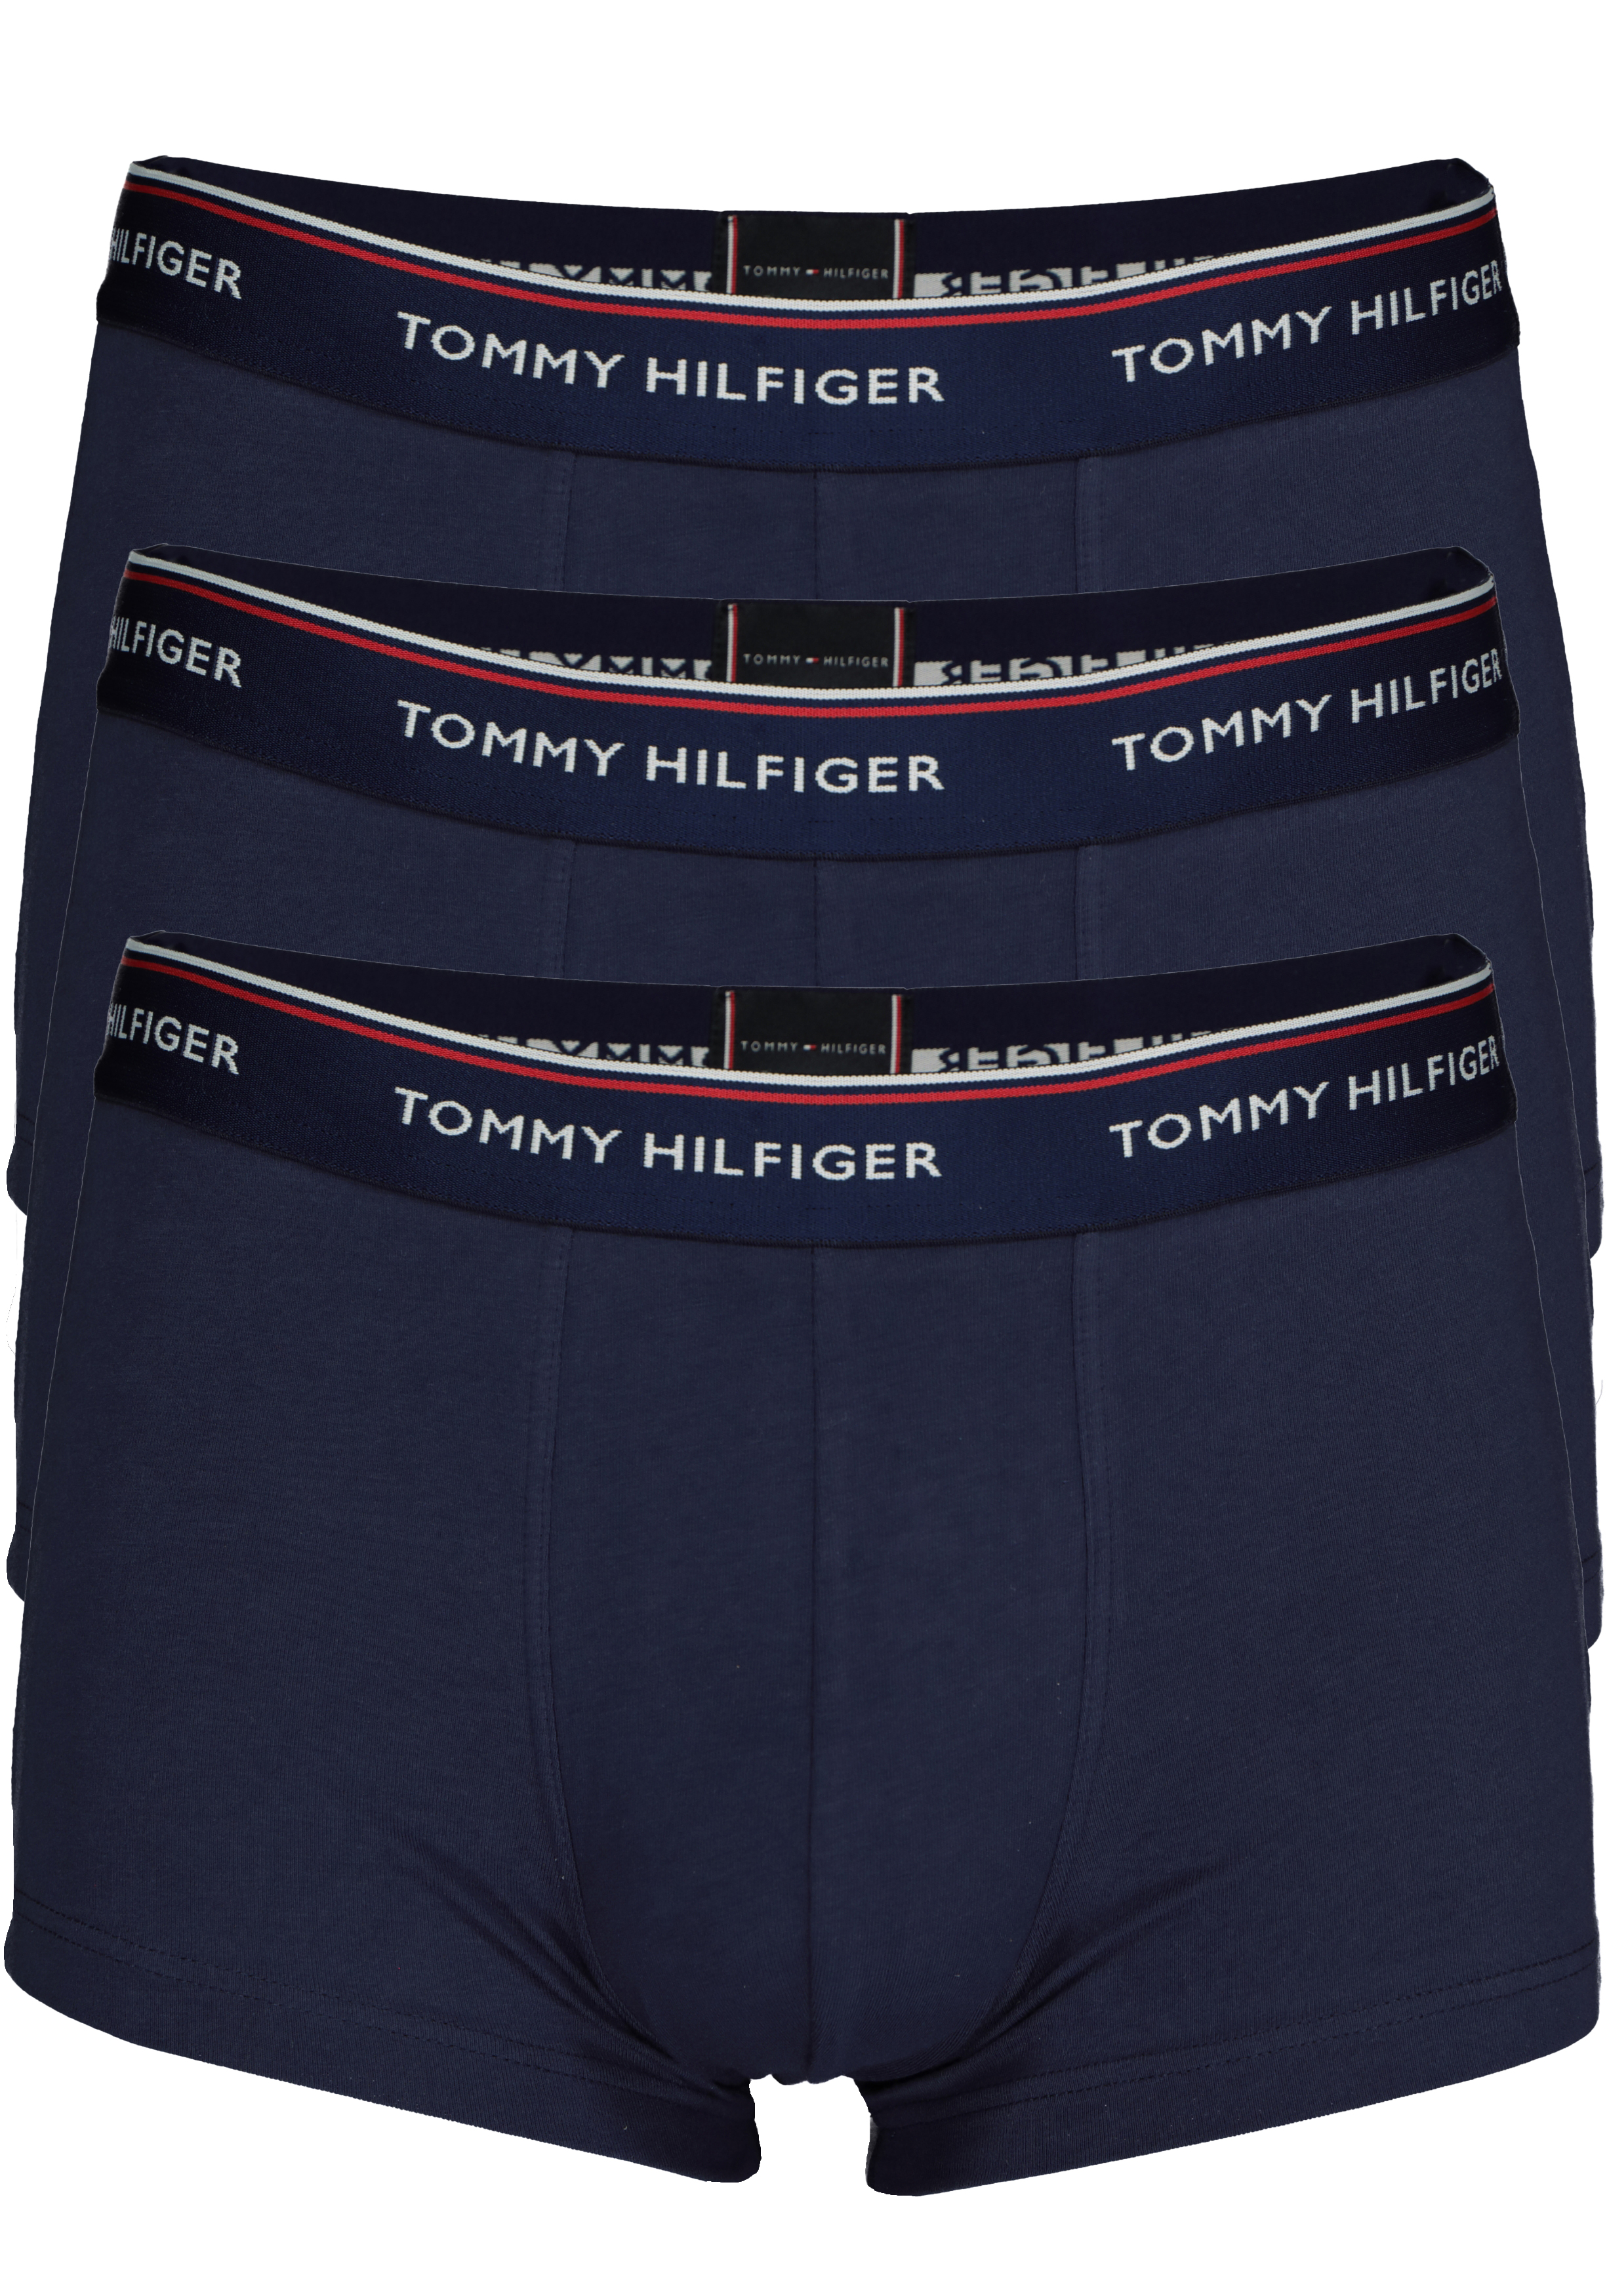 Tommy Hilfiger low rise trunk (3-pack), lage heren boxers kort, blauw 